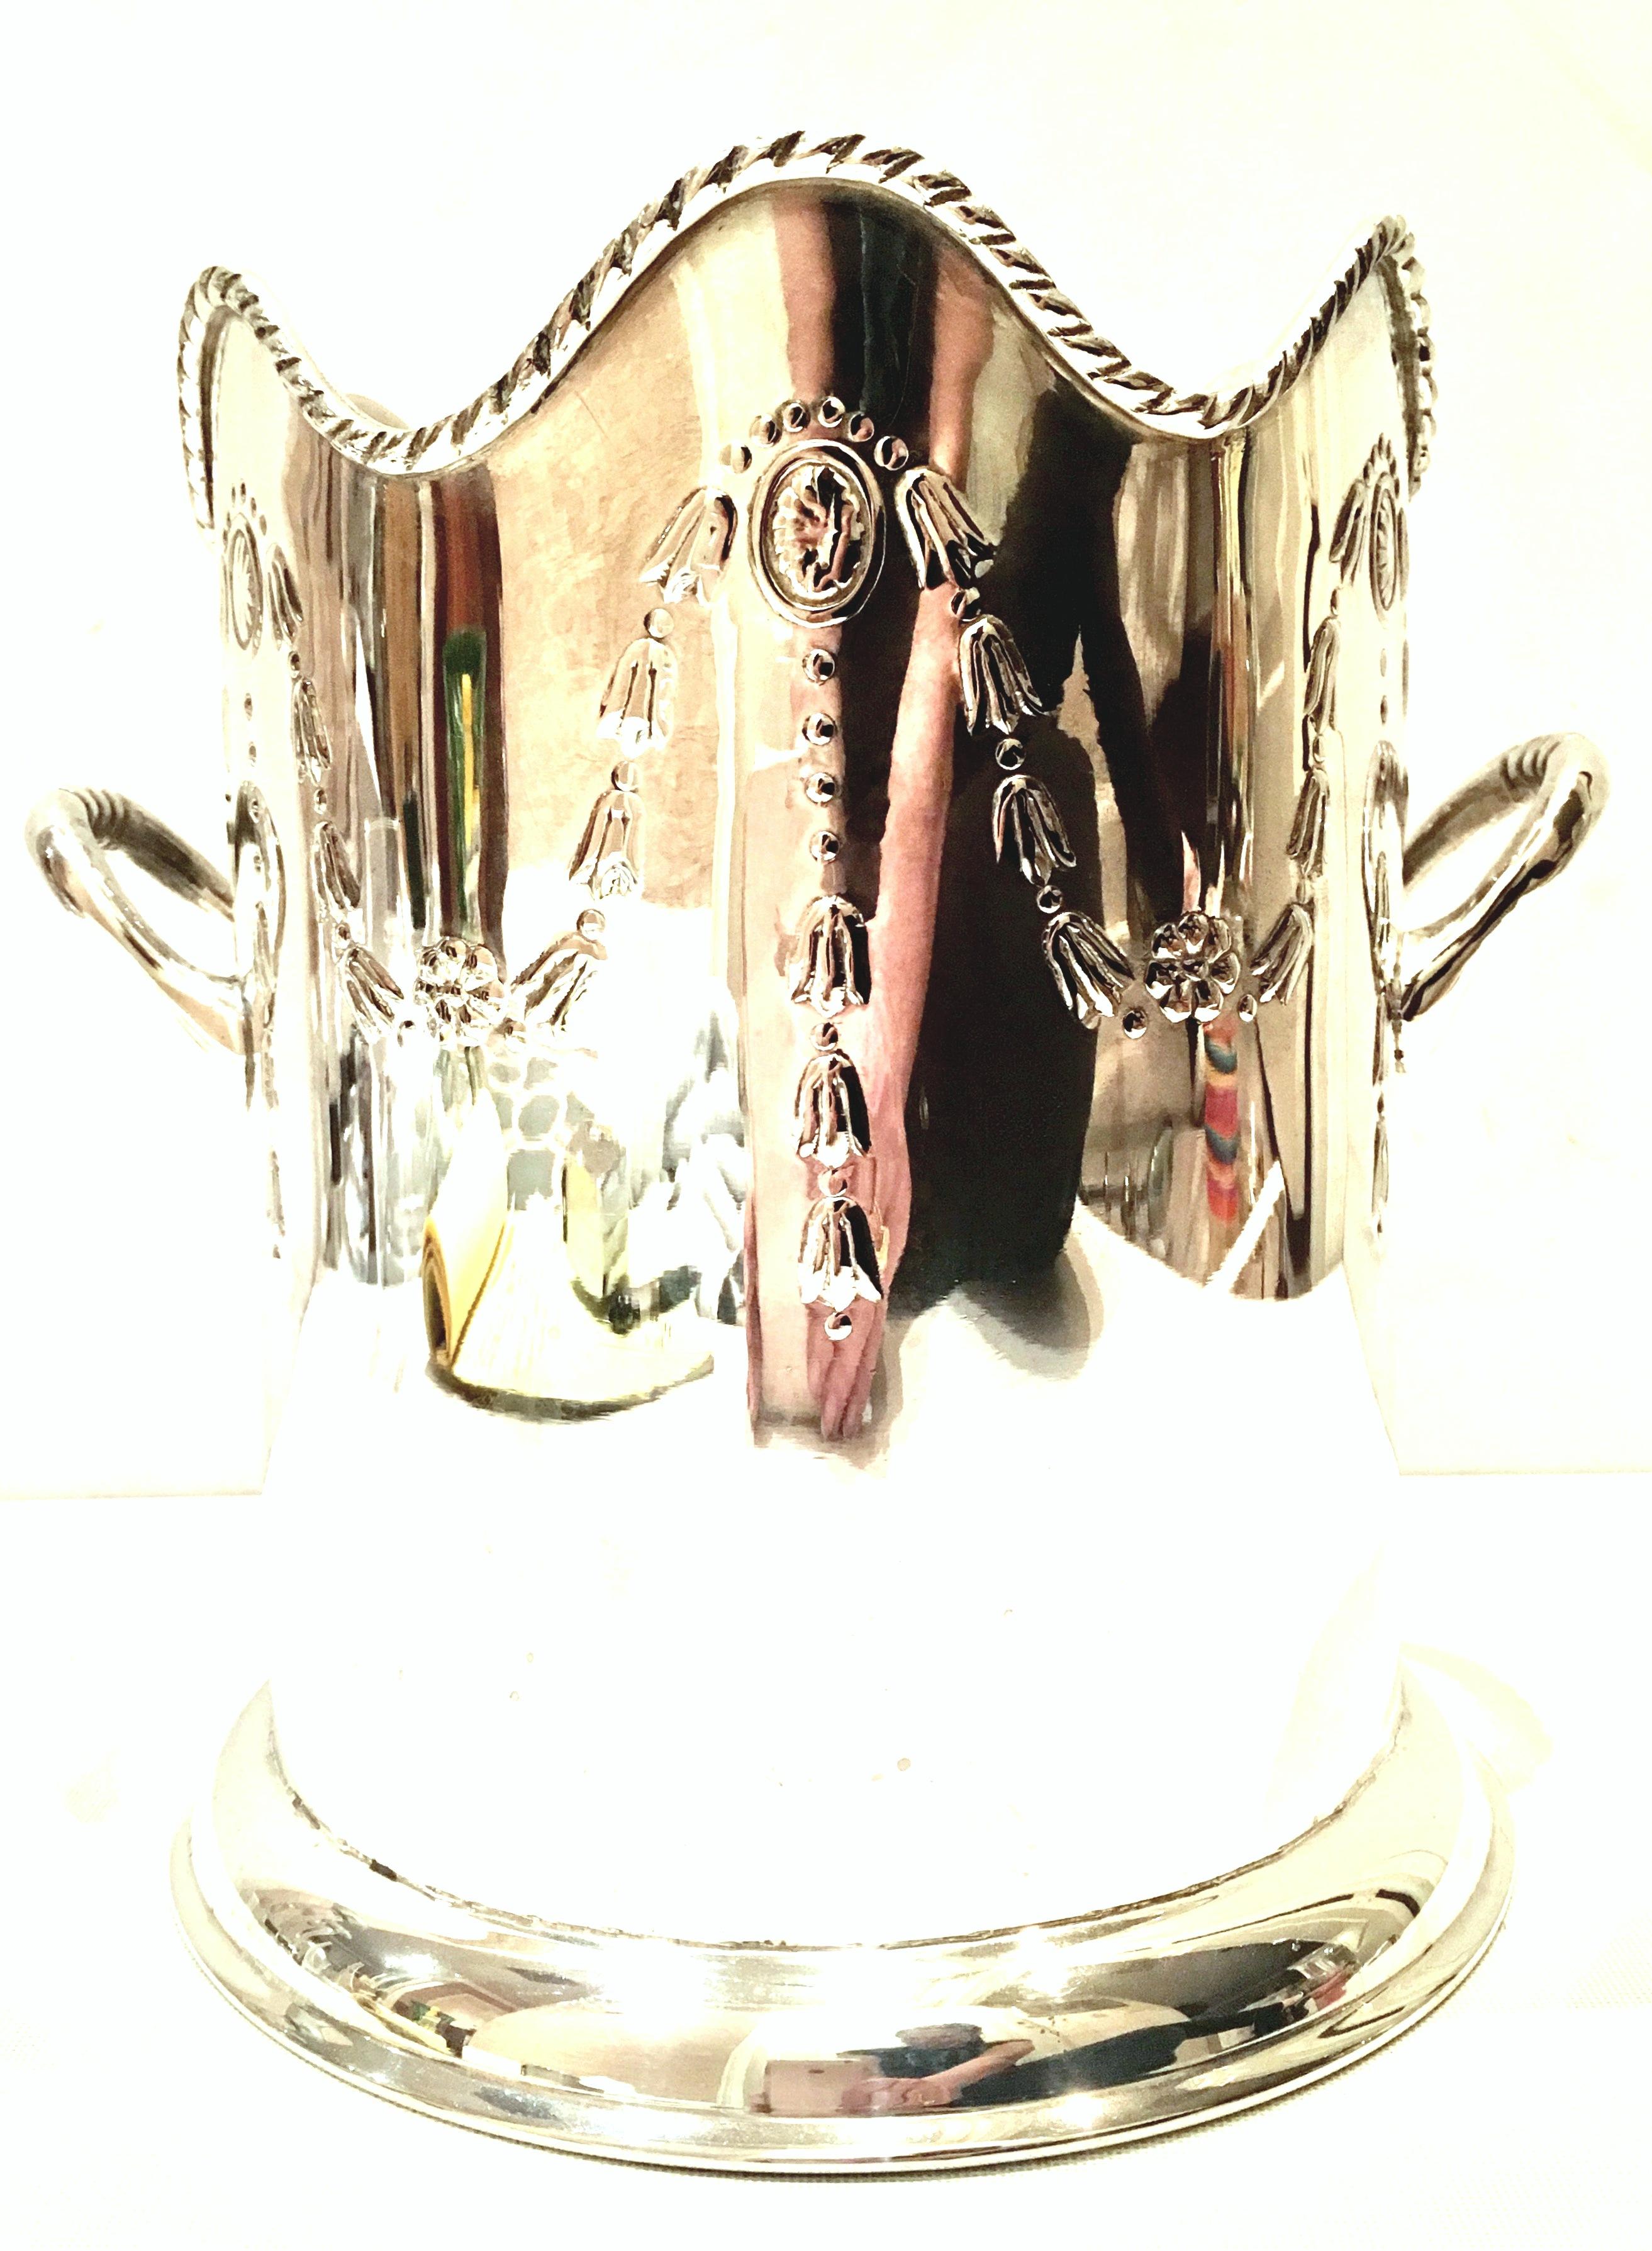 20th Century silver plate neoclassical style two handle champagne or ice bucket. Features a high relief swag and rosette medallion pattern with a rope detail scallop top edge.